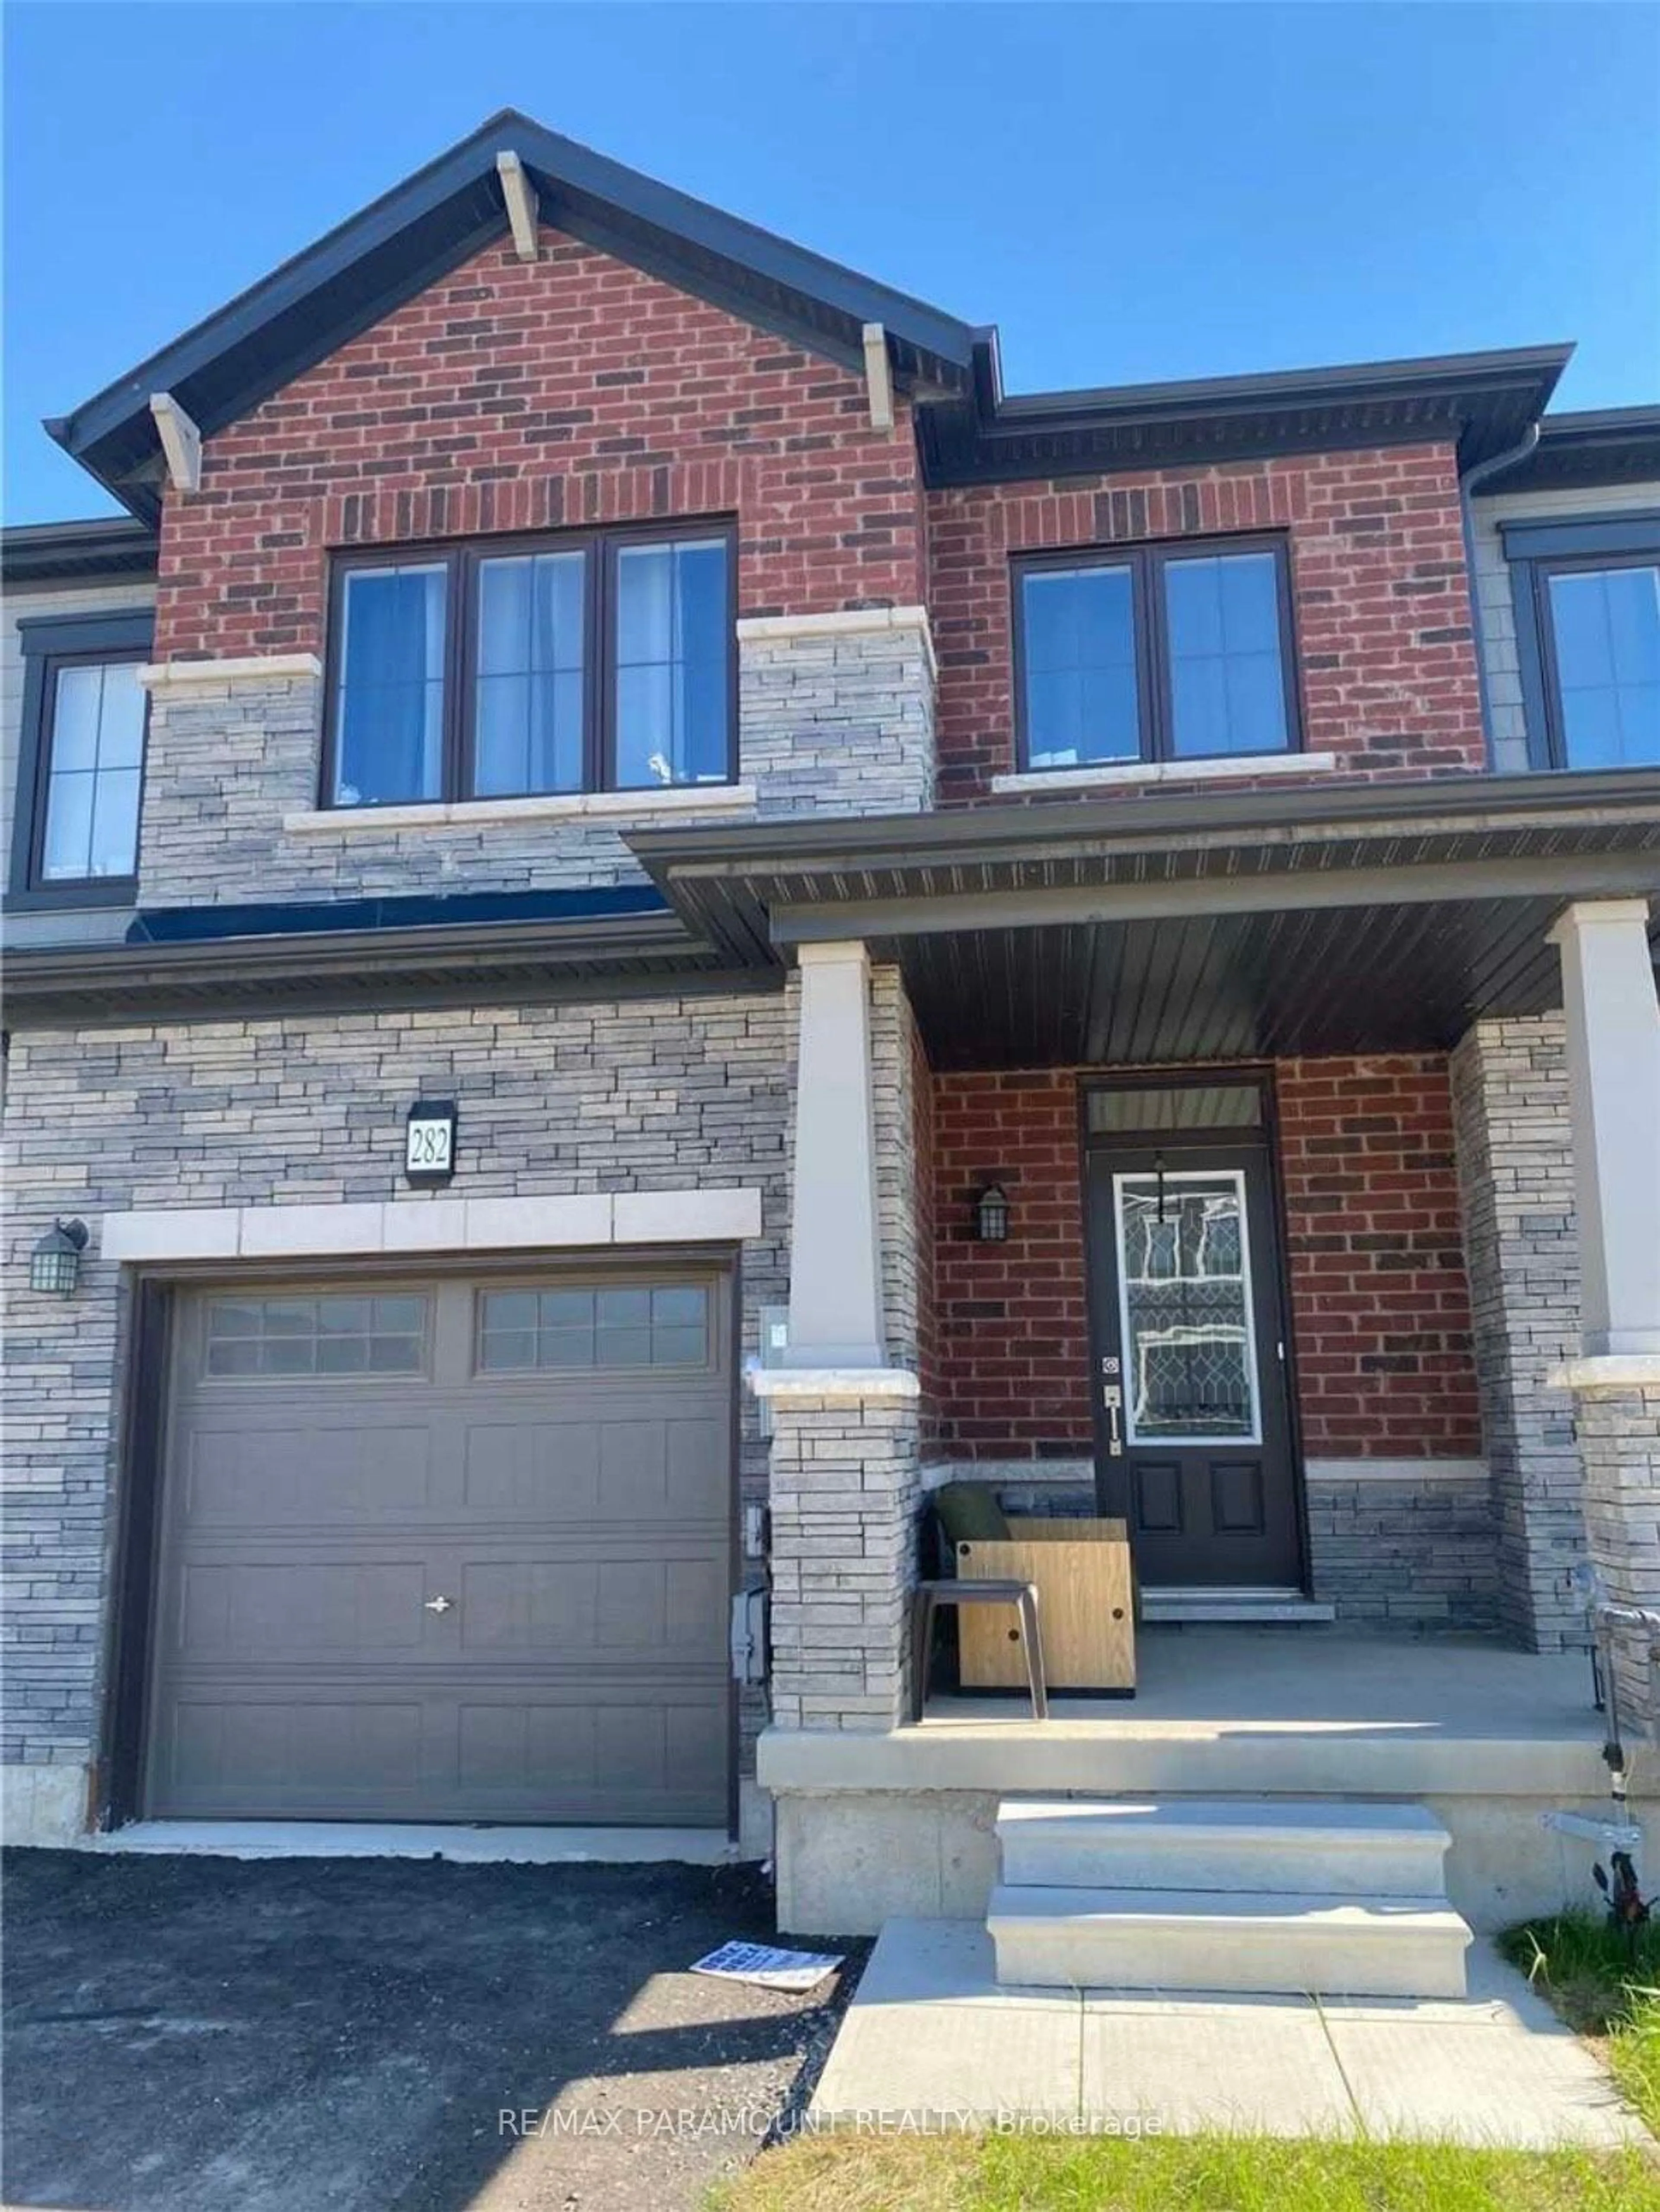 Home with brick exterior material for 282 Explorer Way, Thorold Ontario L2V 0K2